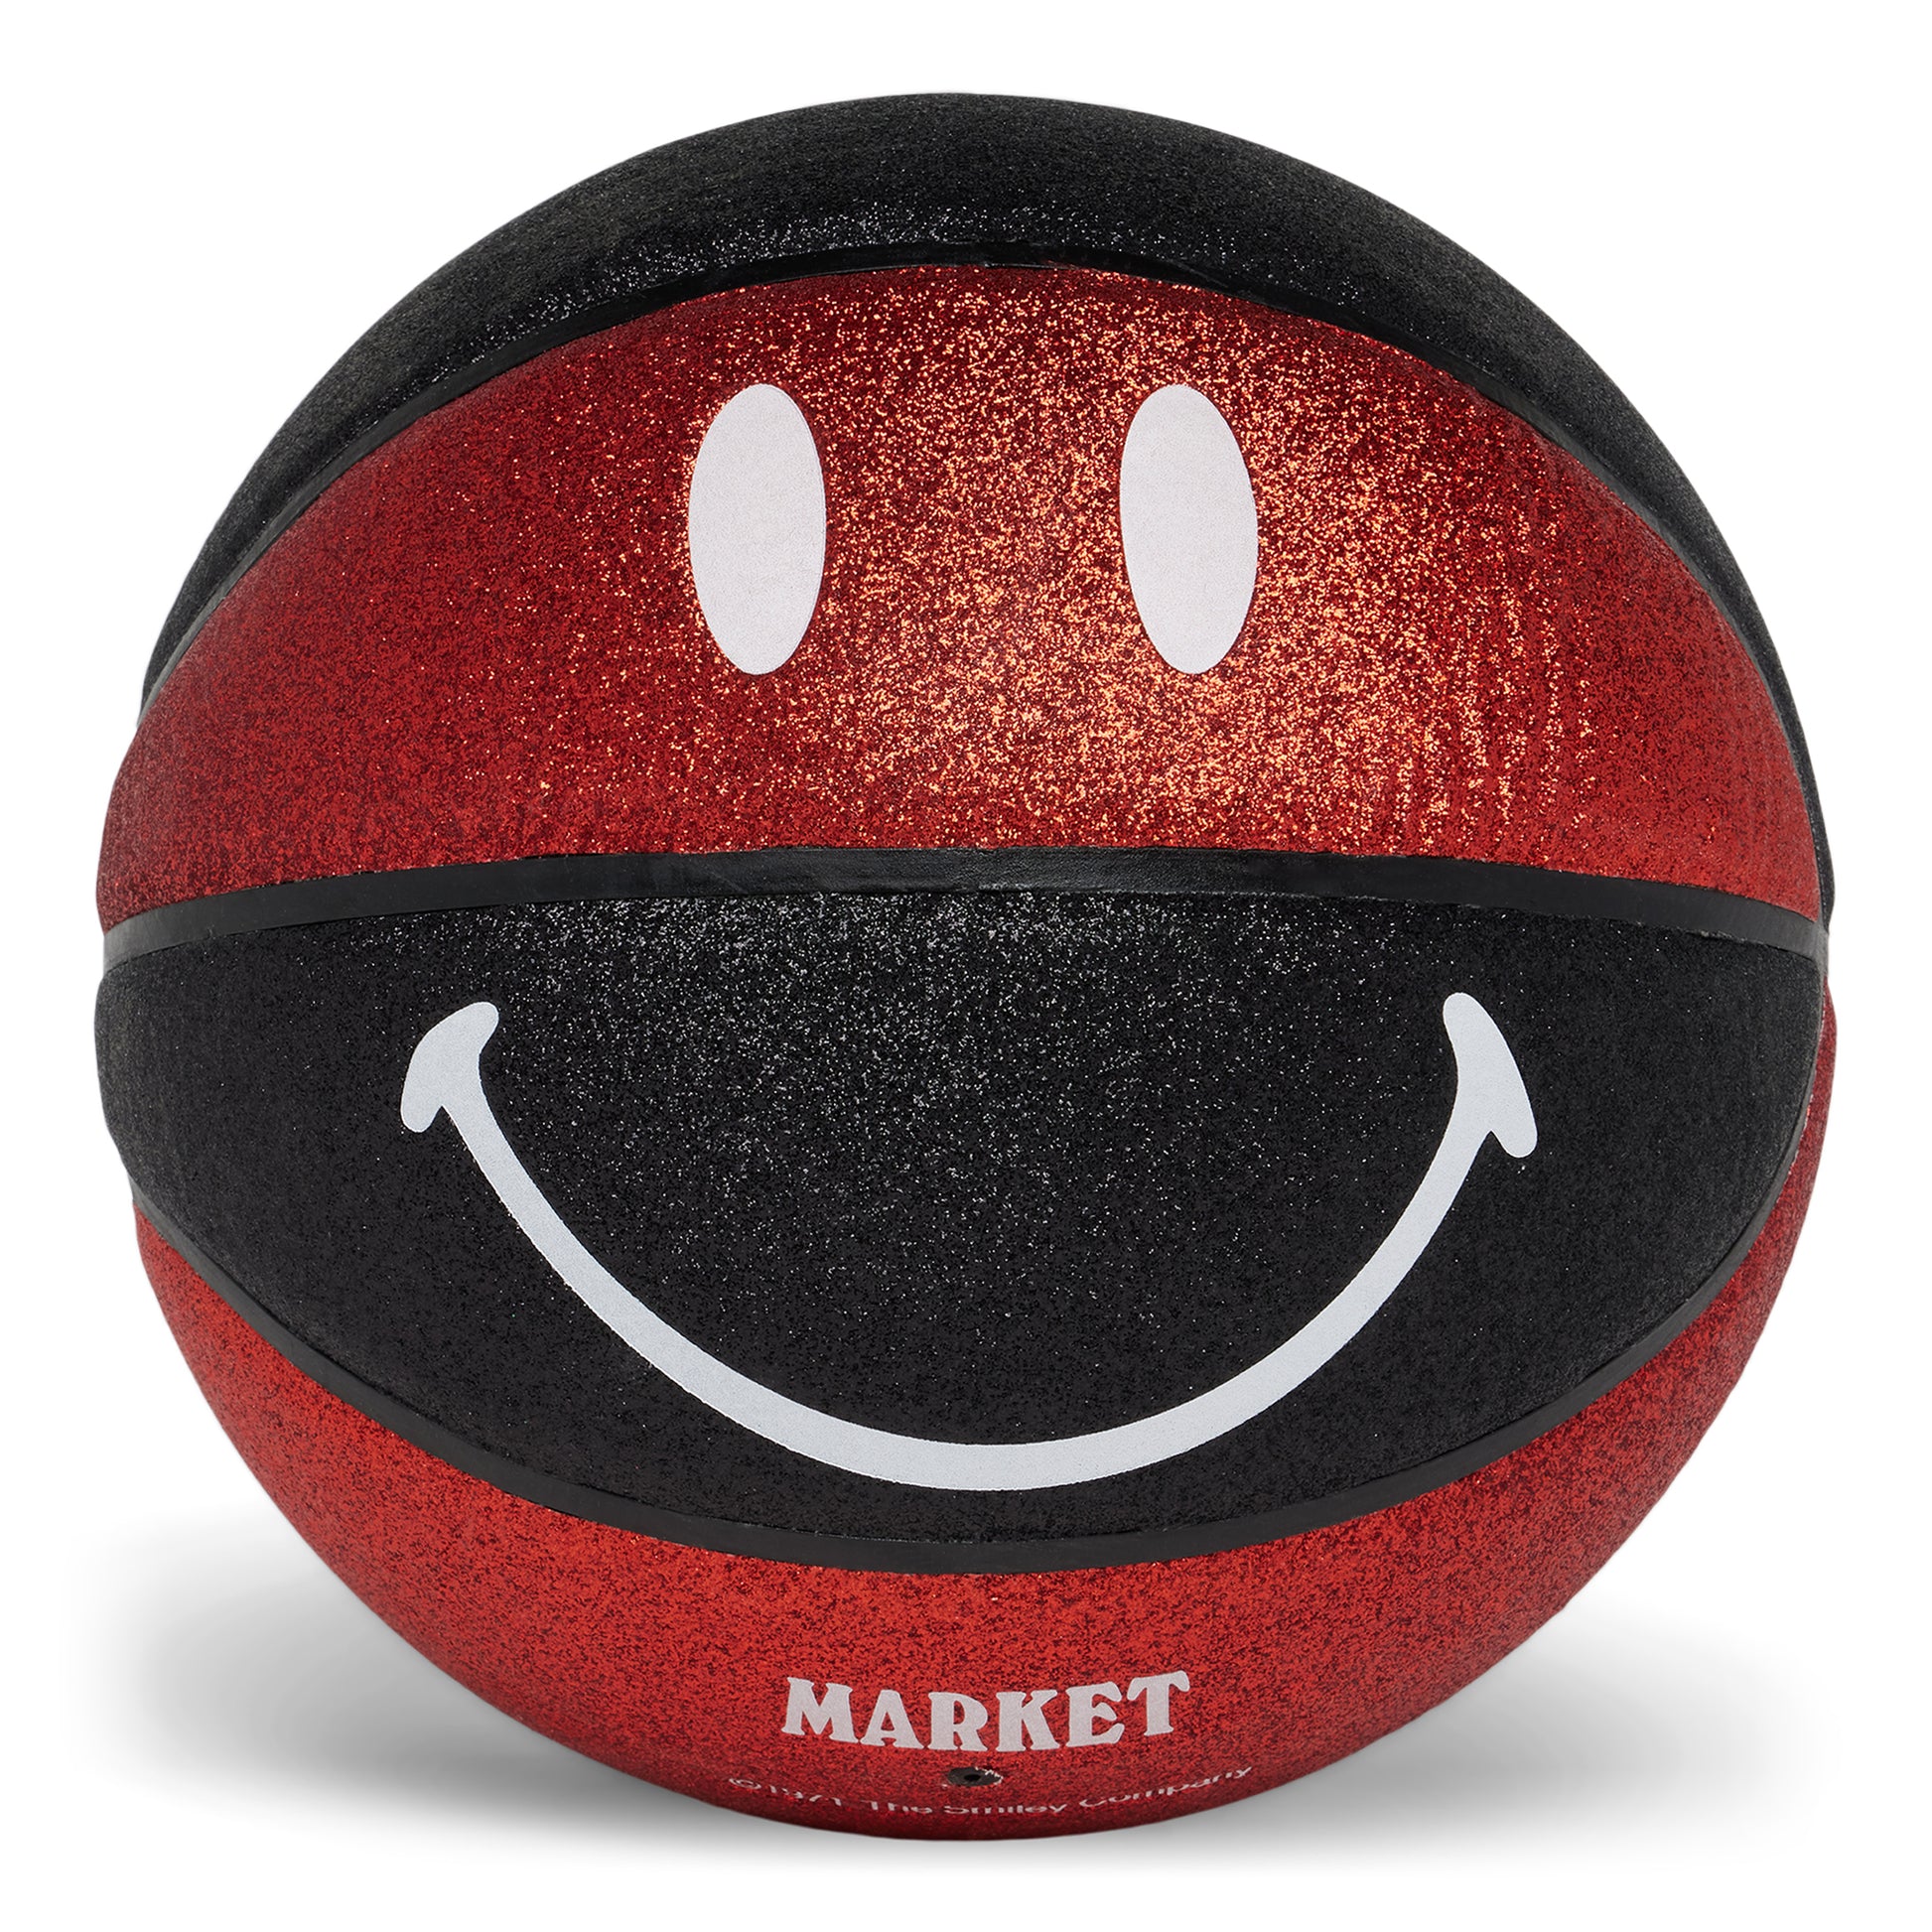 MARKET clothing brand SMILEY GLITTER WINDY CITY BASKETBALL. Find more basketballs, sporting goods, homegoods and graphic tees at MarketStudios.com. Formally Chinatown Market. 